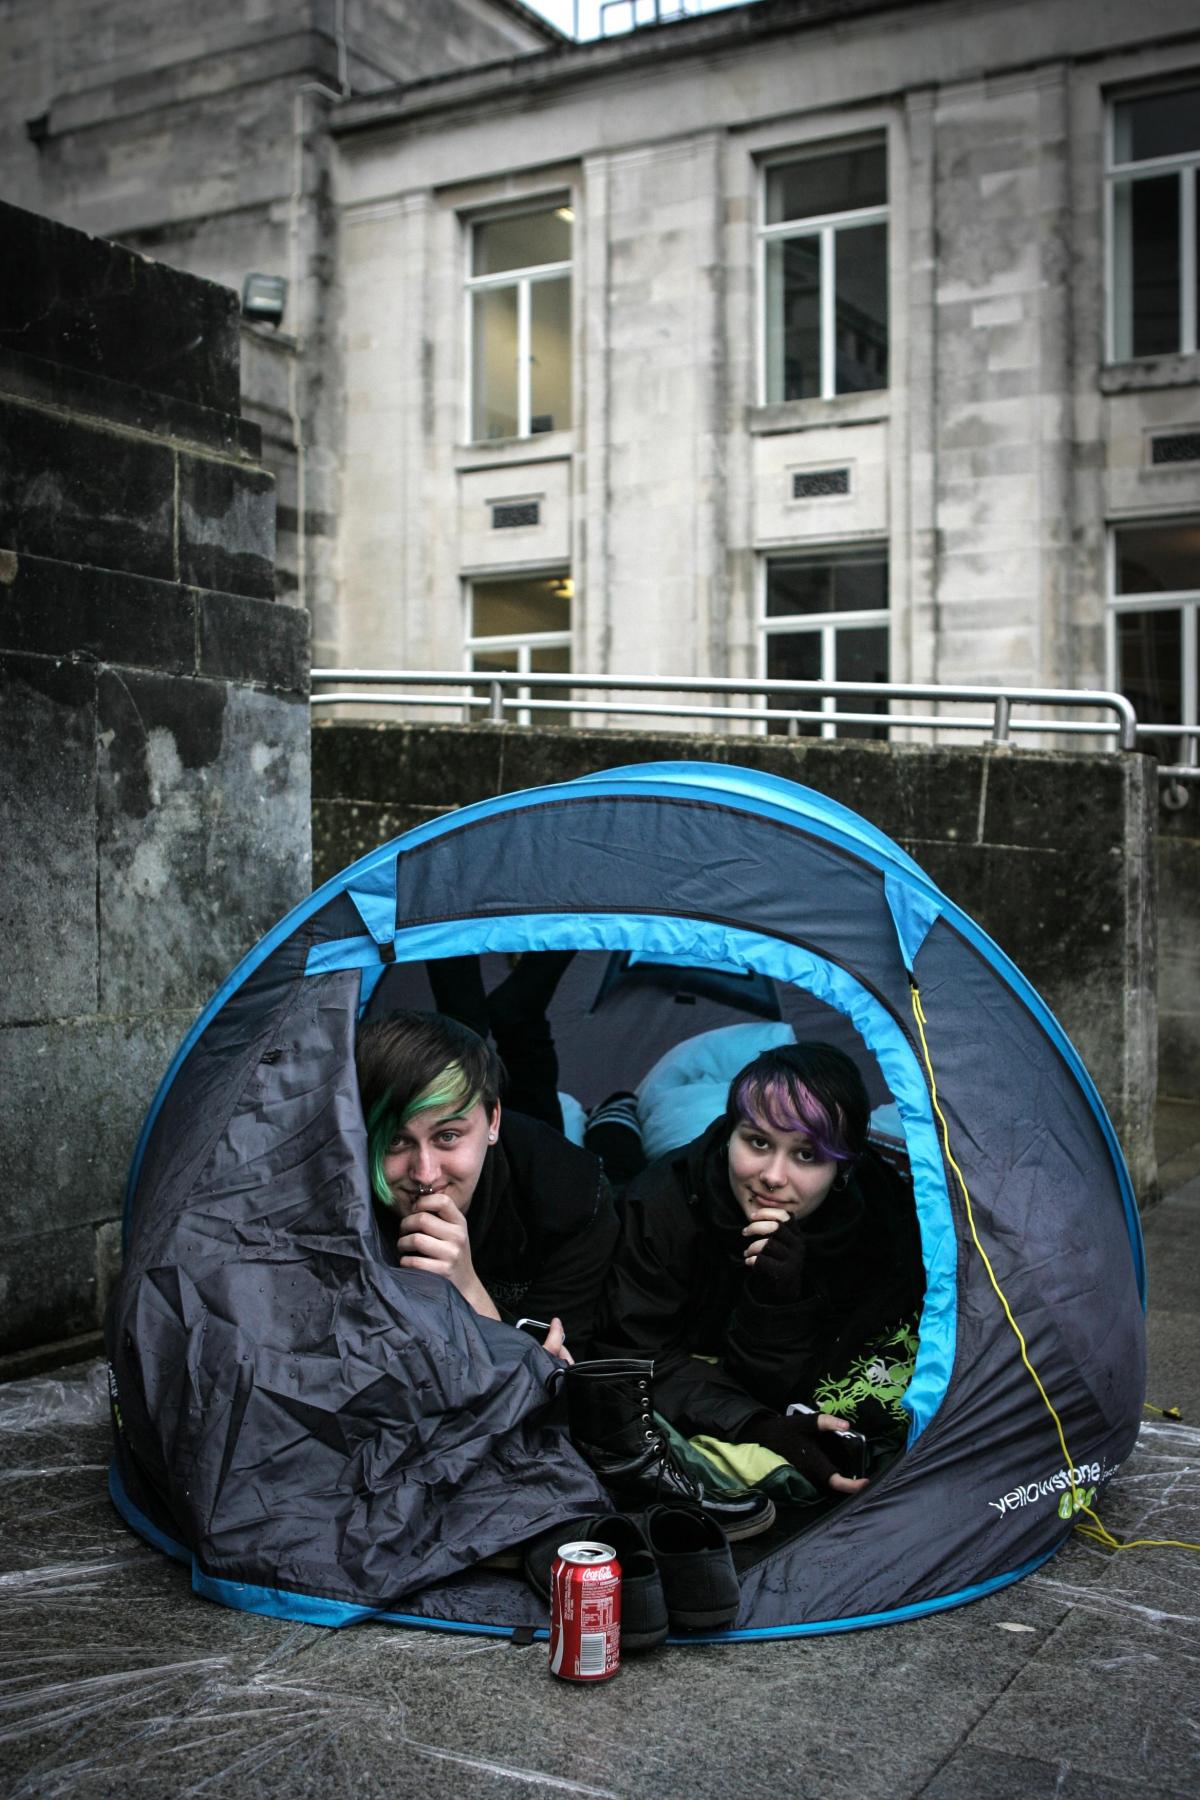 Picture of fans waiting to see Gerard Way at Southampton Guildhall.